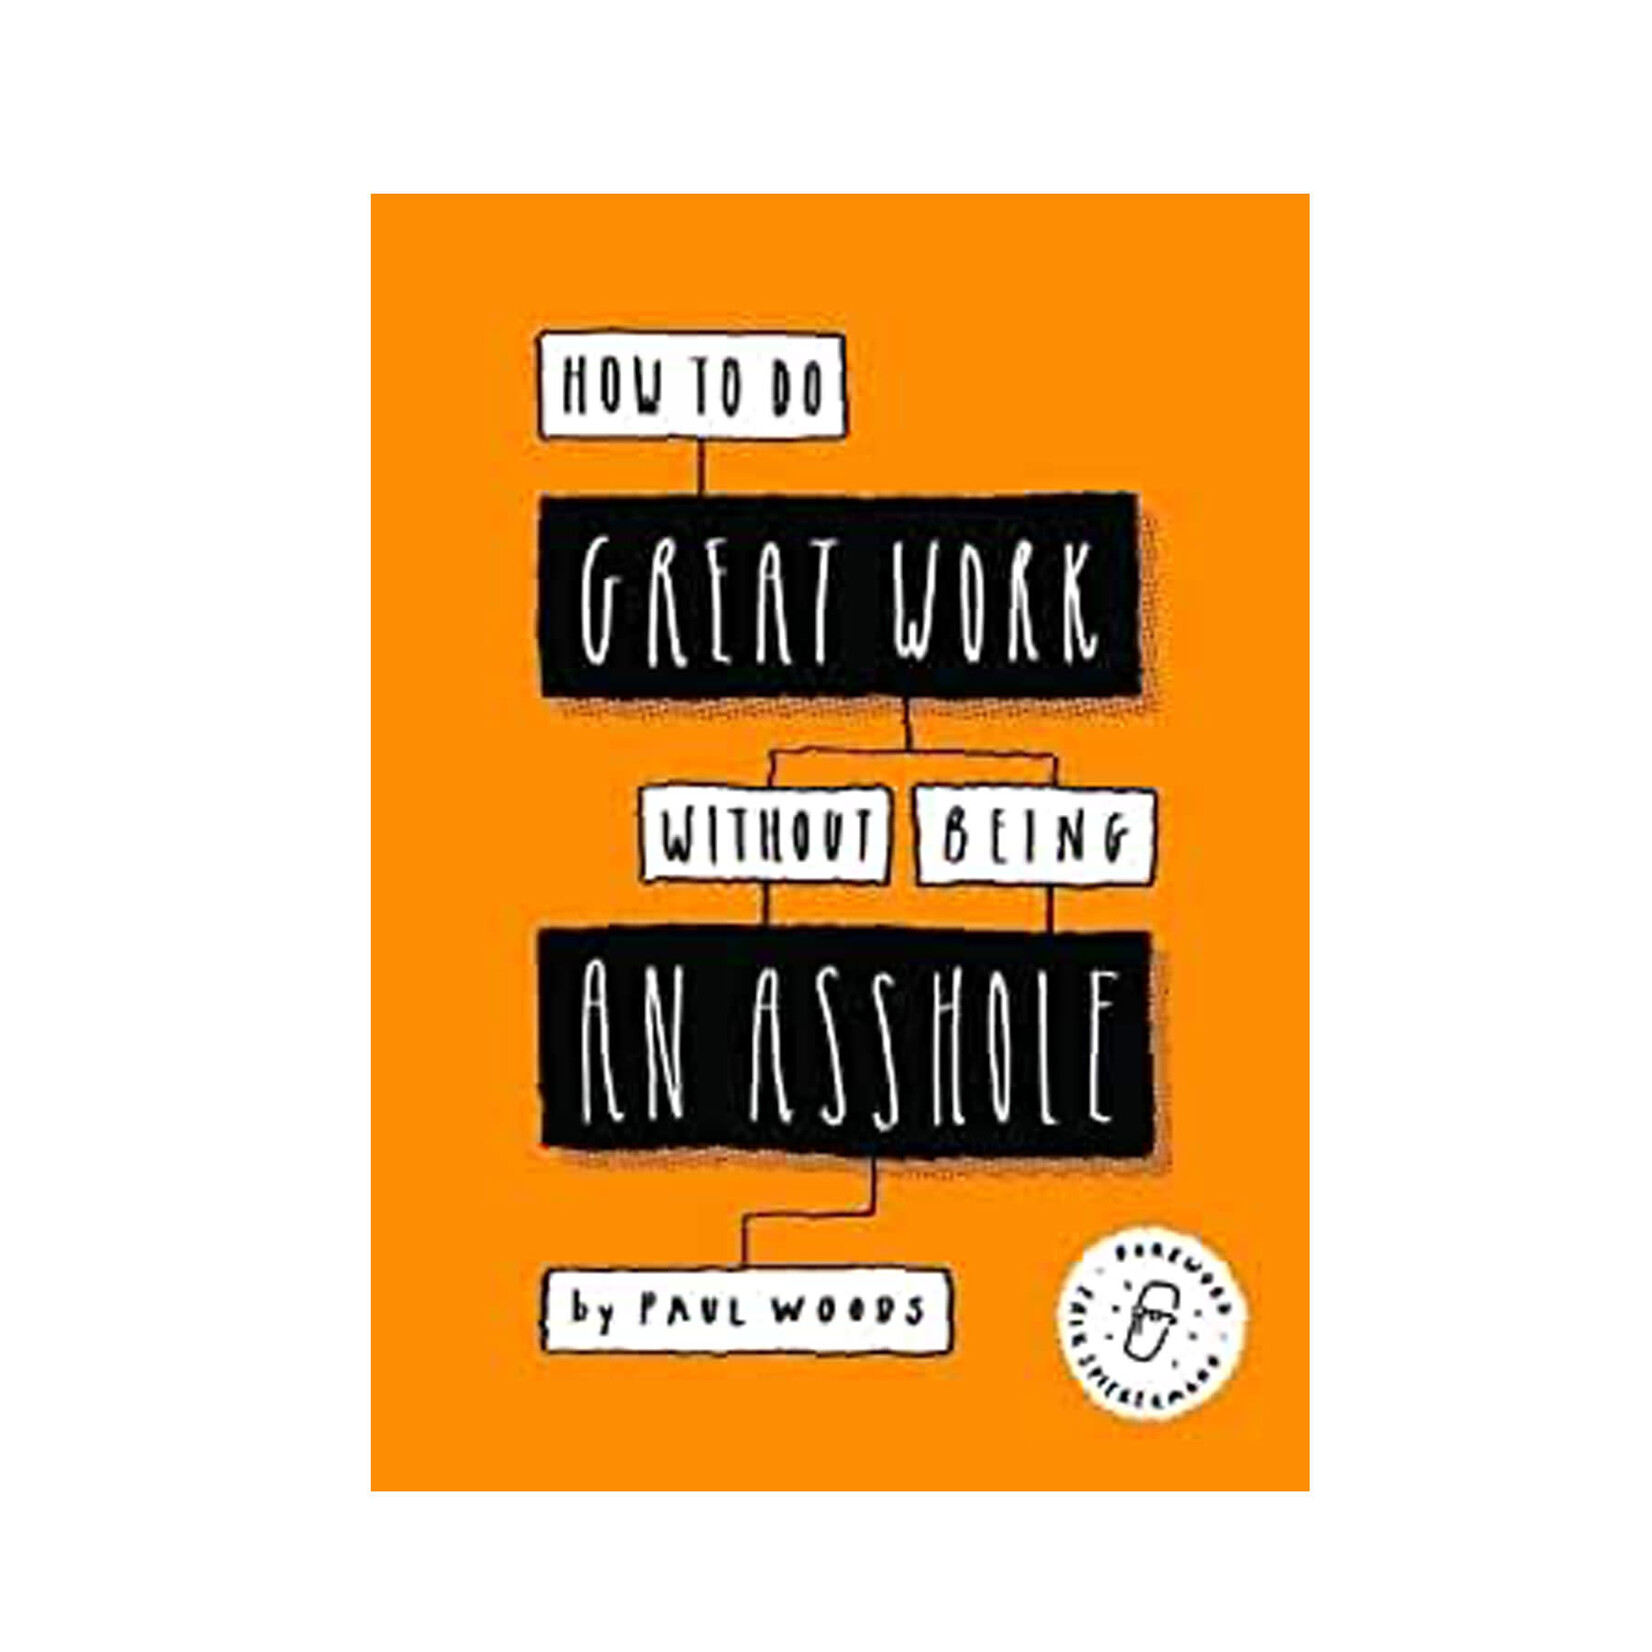 How to Do Great Work Without Being An Asshole